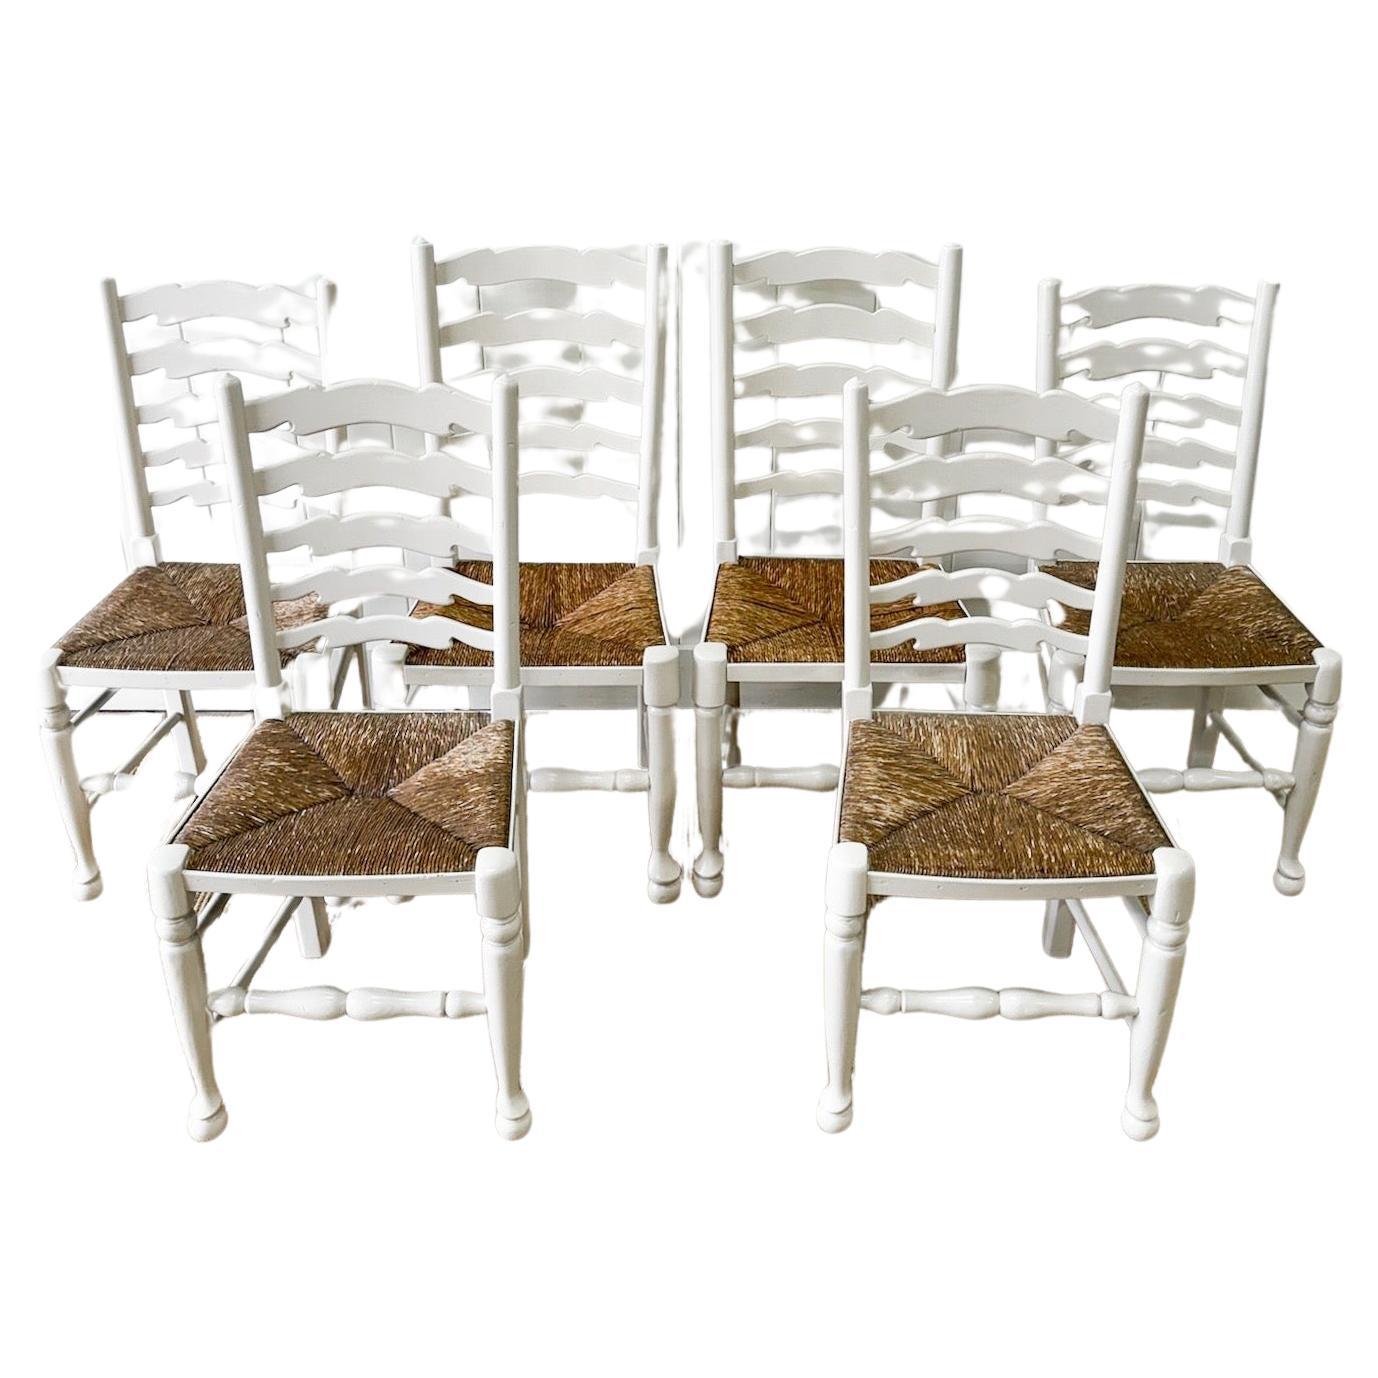 A Harlequin Set of 6 Painted English Ladder Back Chairs